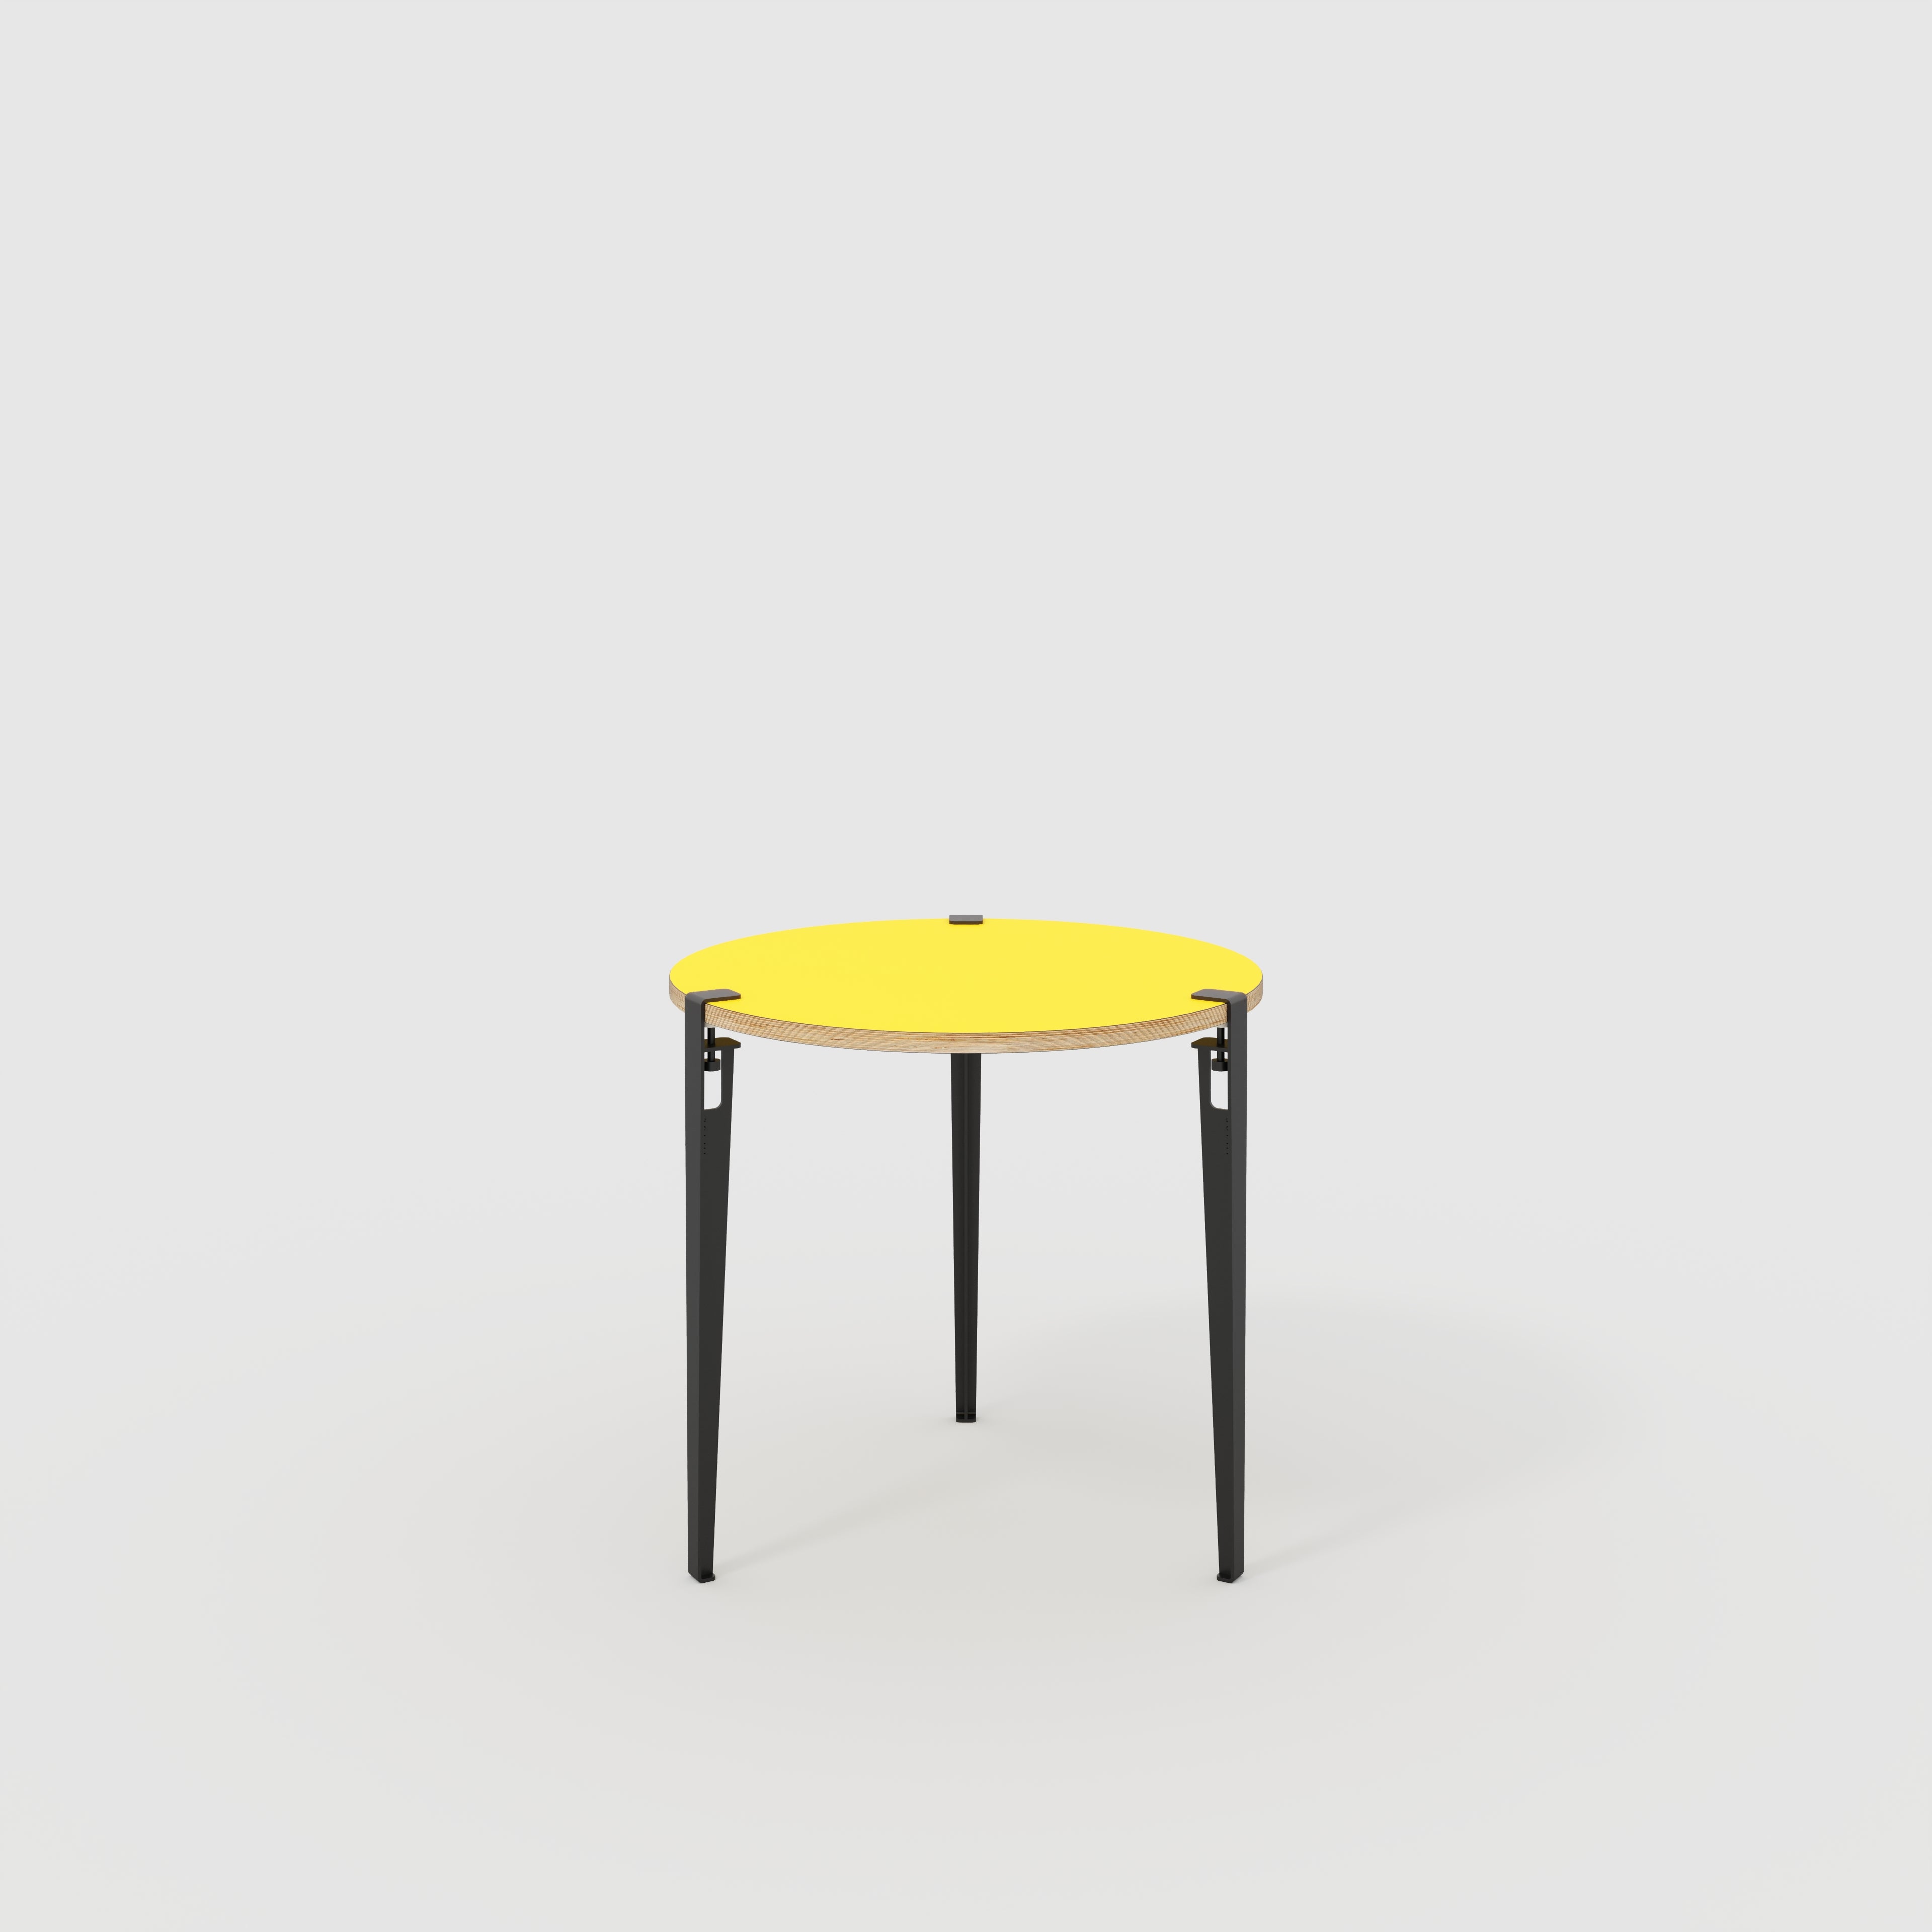 Round Table with Black Tiptoe Legs - Formica Chrome Yellow - 800(dia) x 750(h)